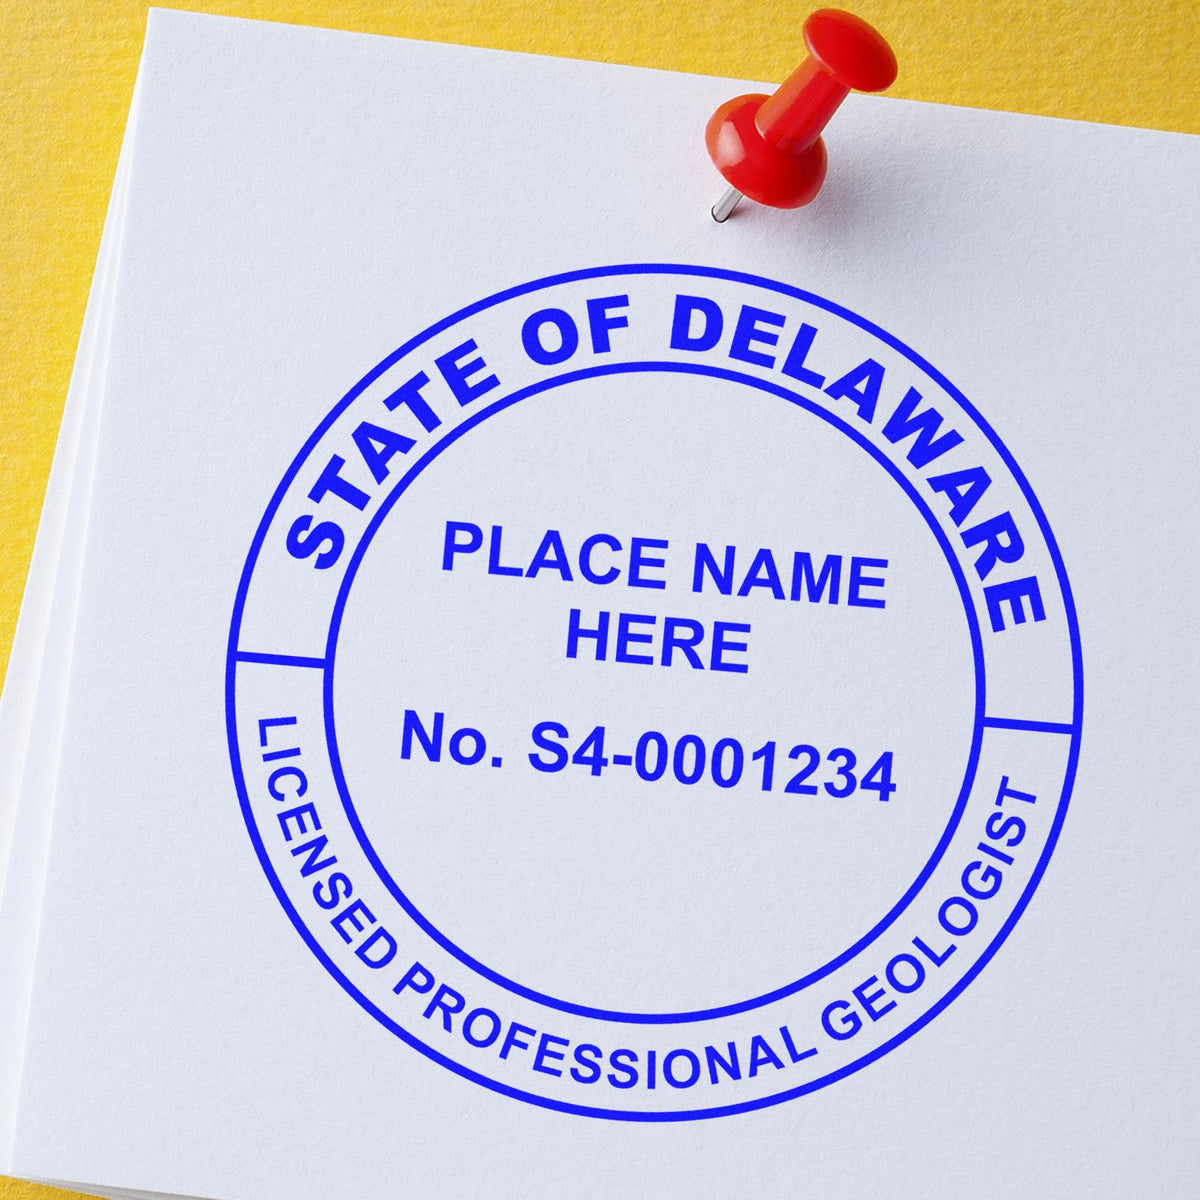 An alternative view of the Slim Pre-Inked Delaware Professional Geologist Seal Stamp stamped on a sheet of paper showing the image in use